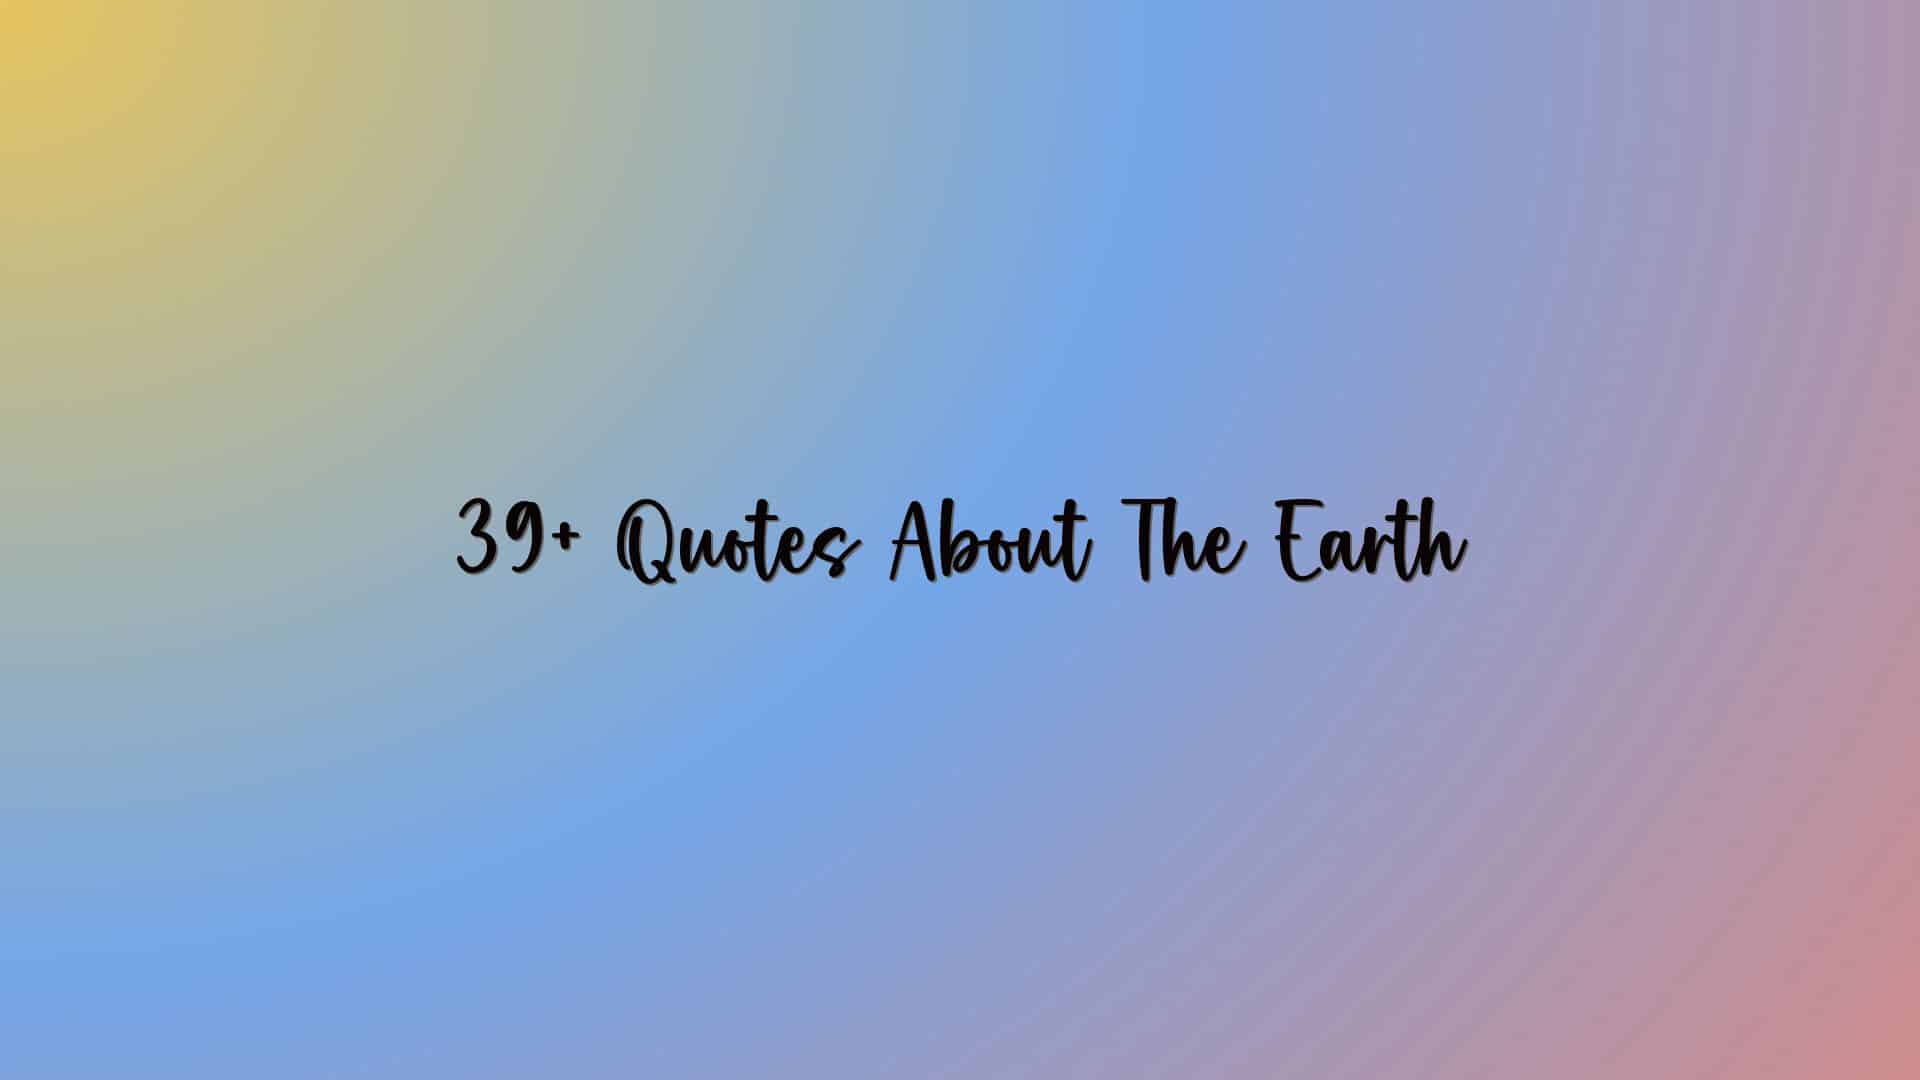 39+ Quotes About The Earth